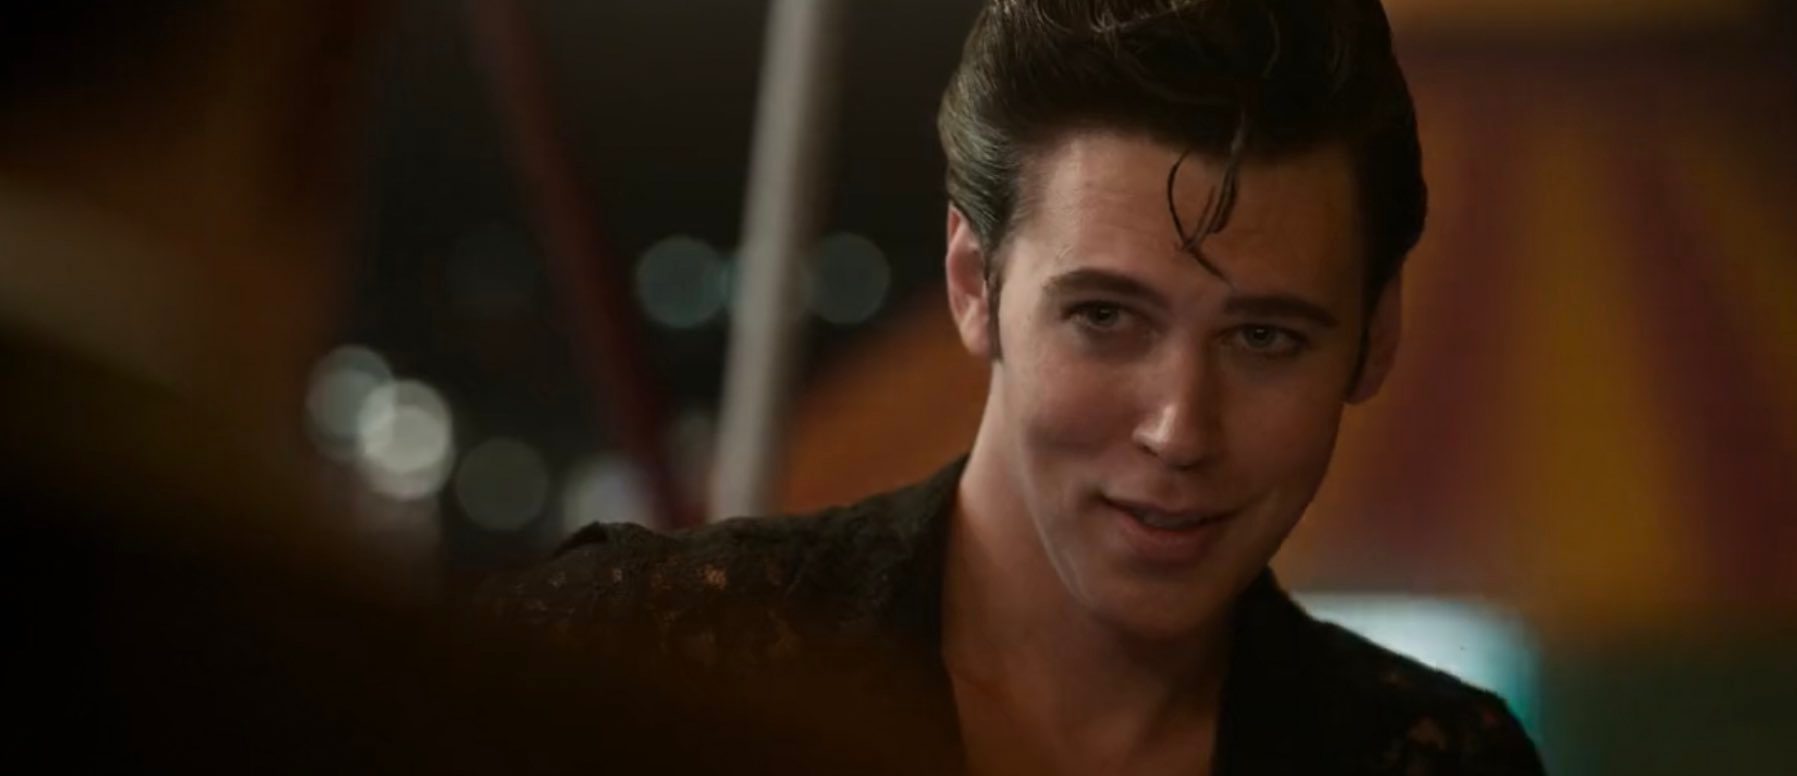 WATCH: Austin Butler transforms into the King in ‘Elvis’ trailer